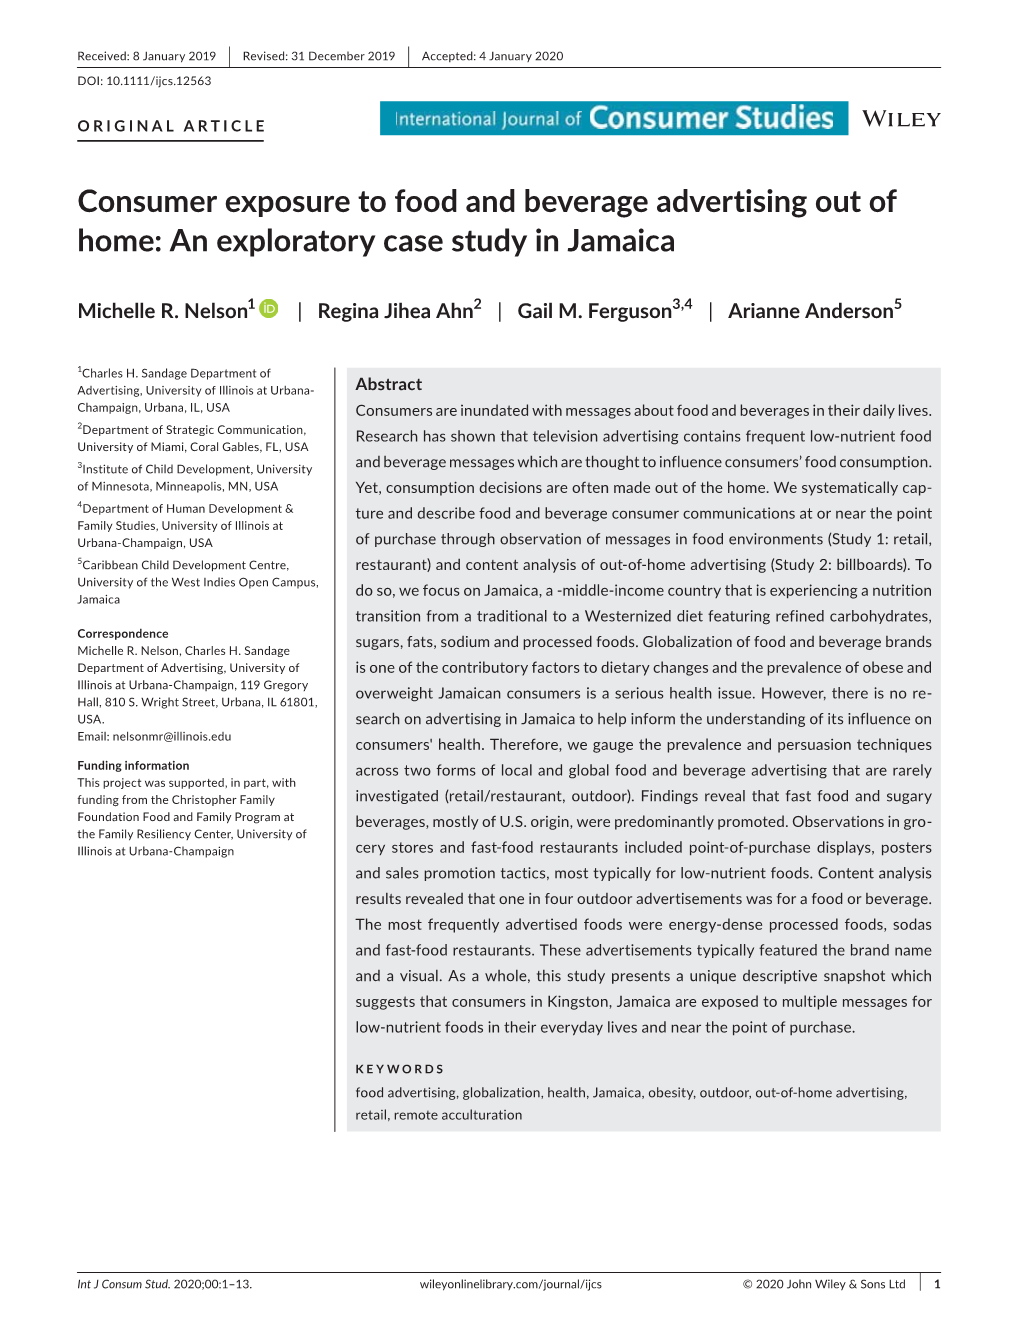 Consumer Exposure to Food and Beverage Advertising out of Home: an Exploratory Case Study in Jamaica